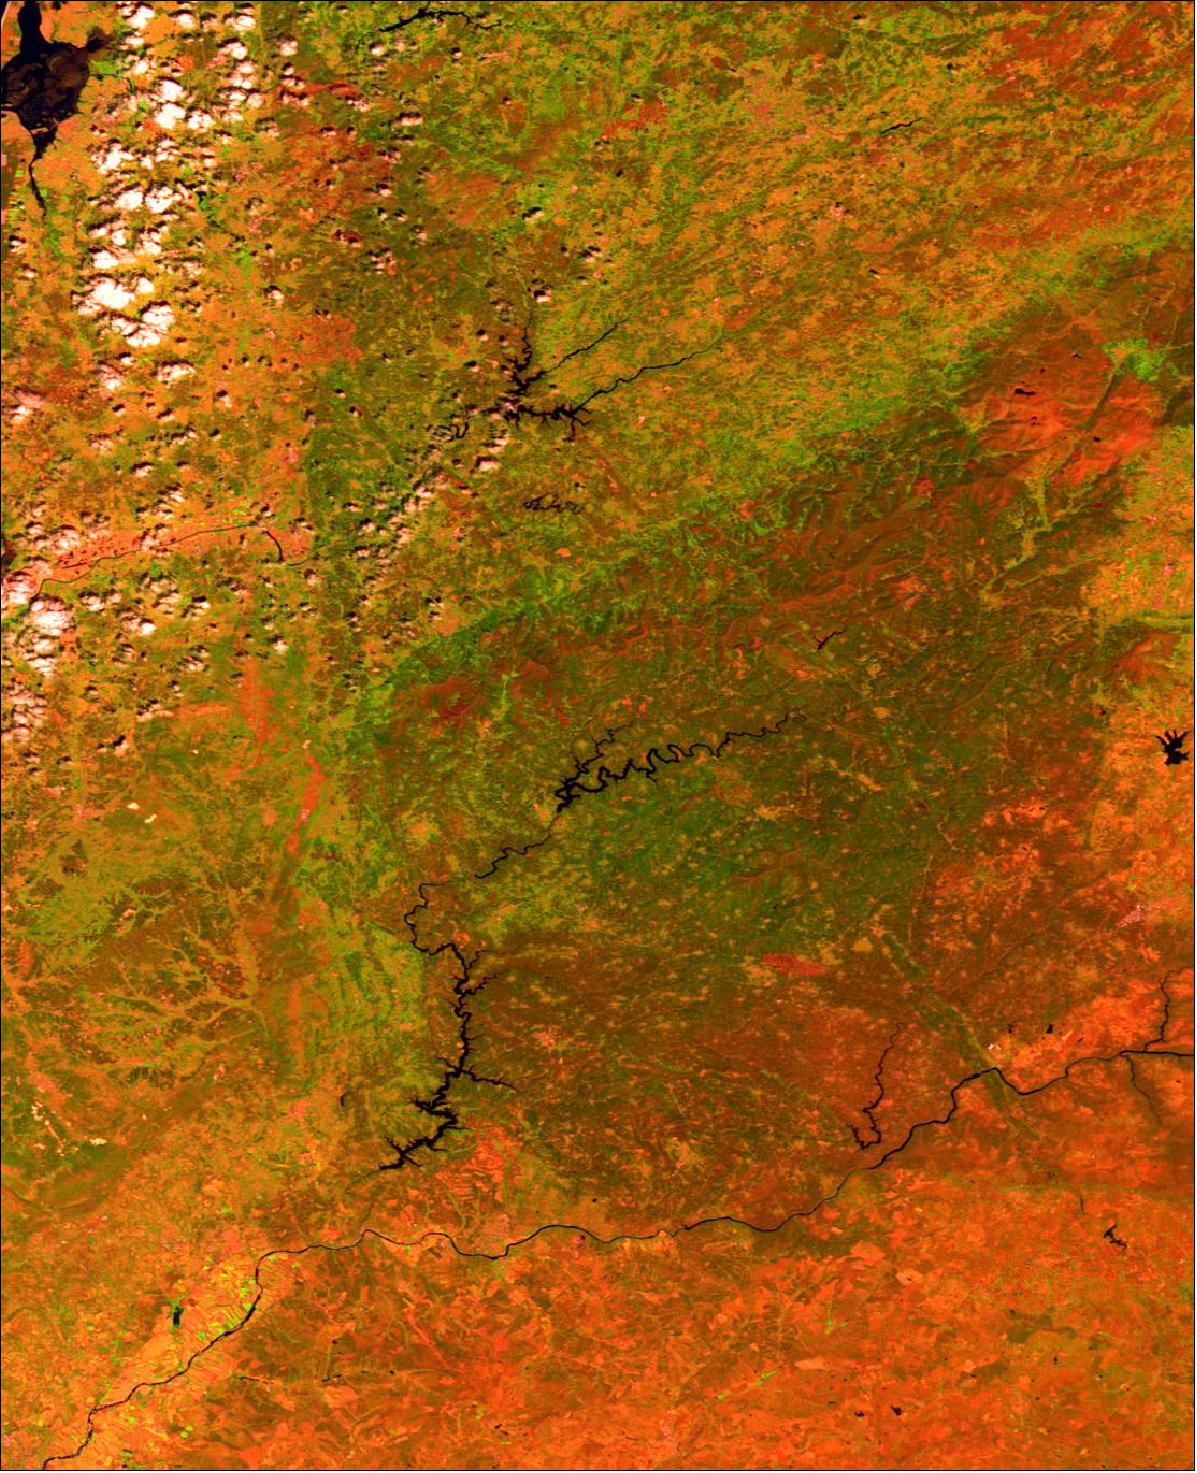 Figure 37: Before the blaze: Portugal's Pedrógão Grande region. This 100 m-resolution image was acquired on 19 May 2017 by PROBA-V, showing the region before the forest fire that started on 17 June (image credit: ESA/BELSPO produced by VITO)